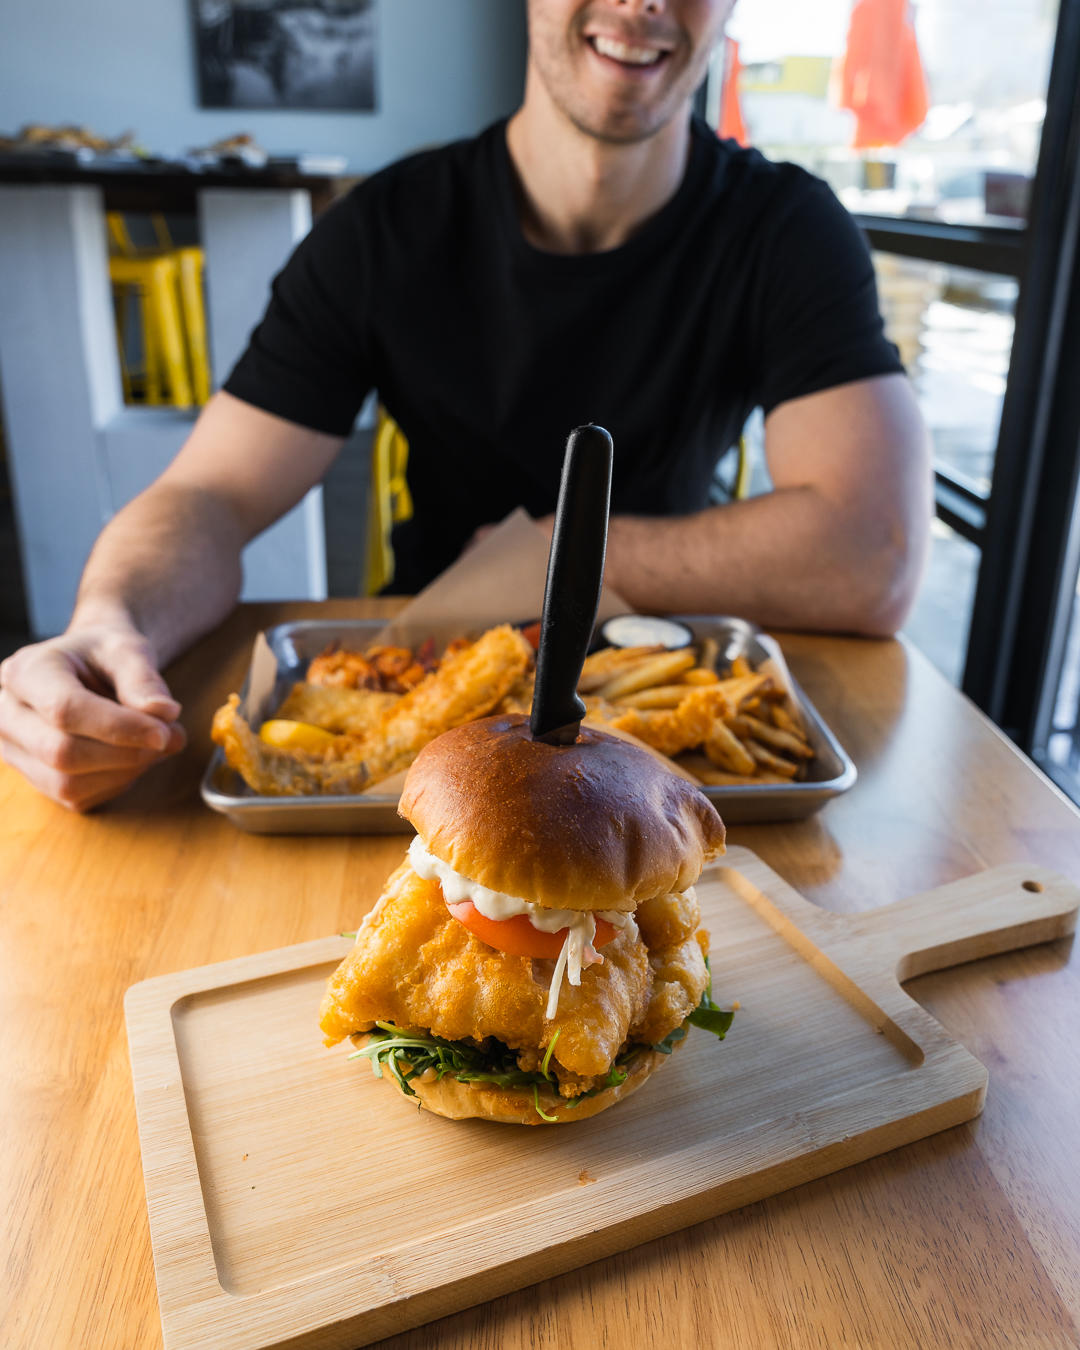 OUR LEGENDARY FISH SANDWICH - Joey's Famous Fish, lime slaw, tomato, mixed greens, chipotle aioli an Joey's Fish Shack Camrose (780)673-0164